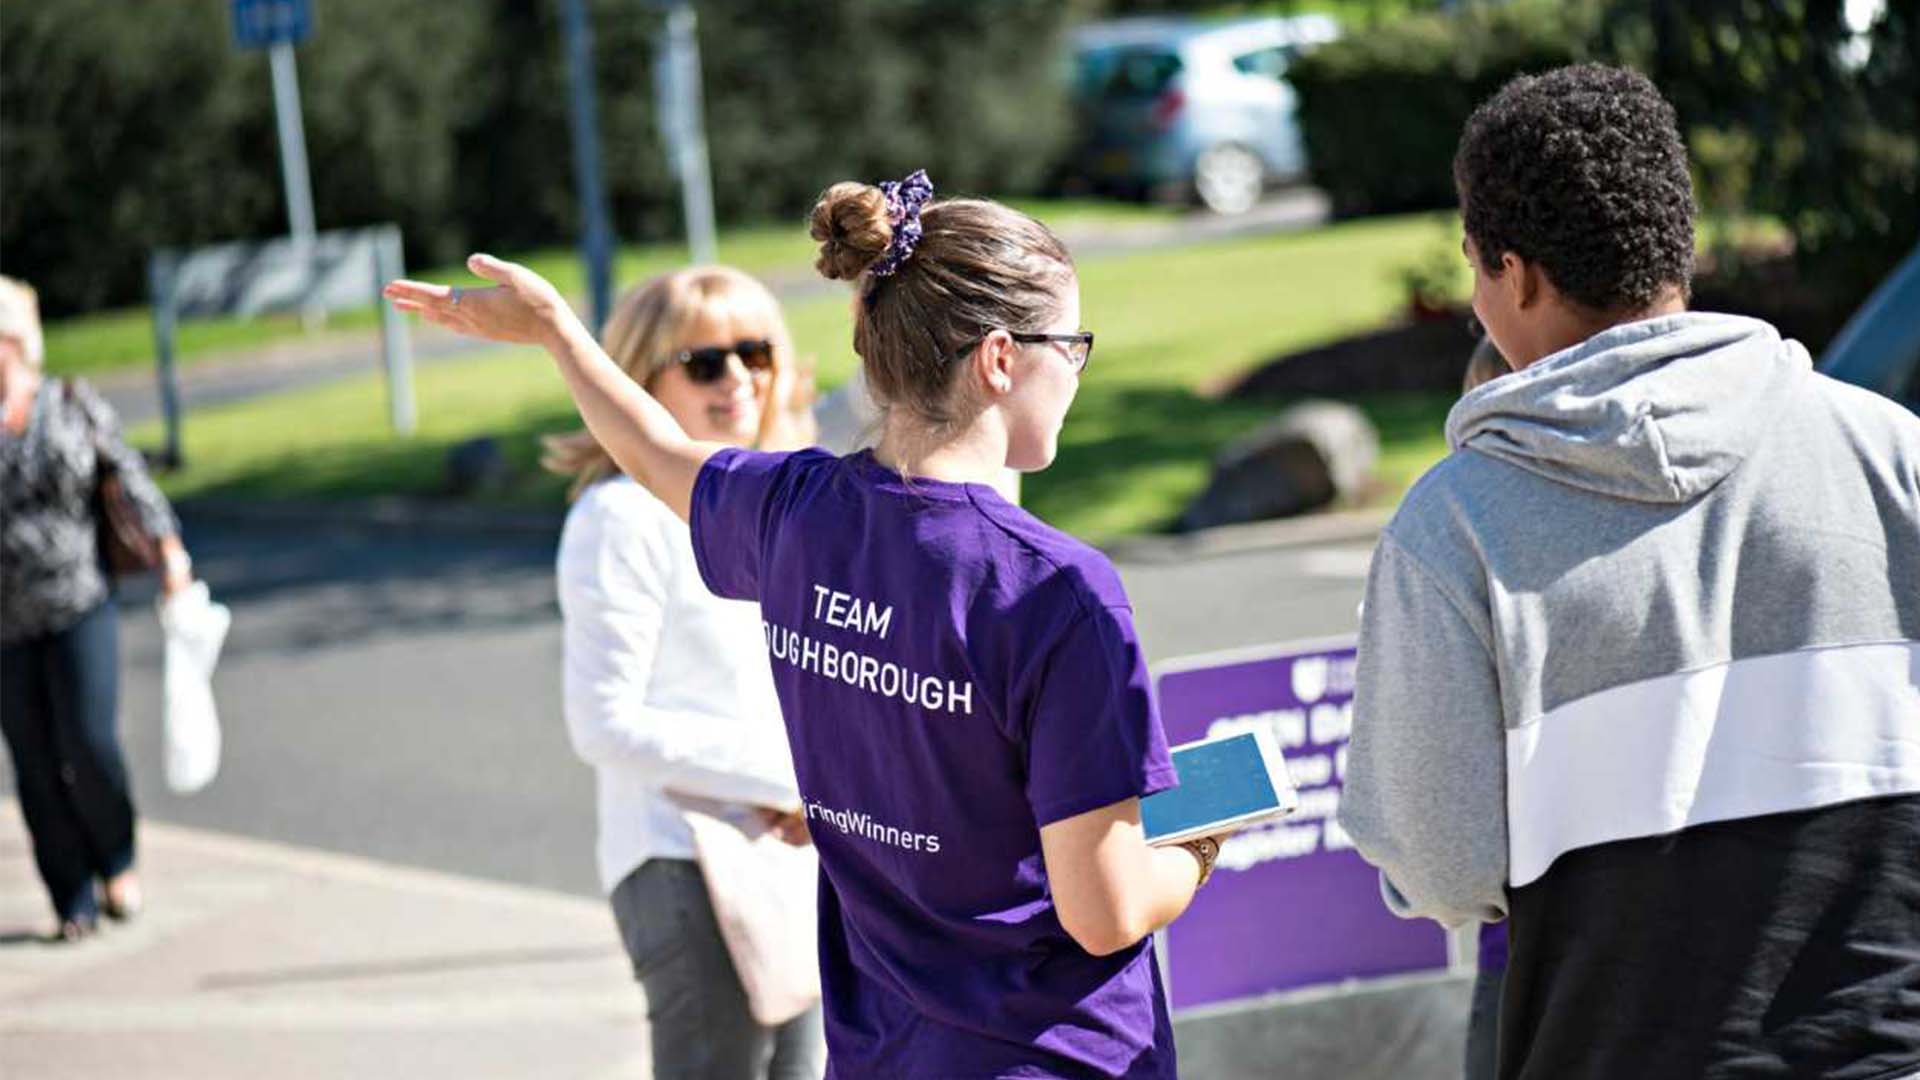 A Student Ambassador giving directions at a Loughborough University open day.